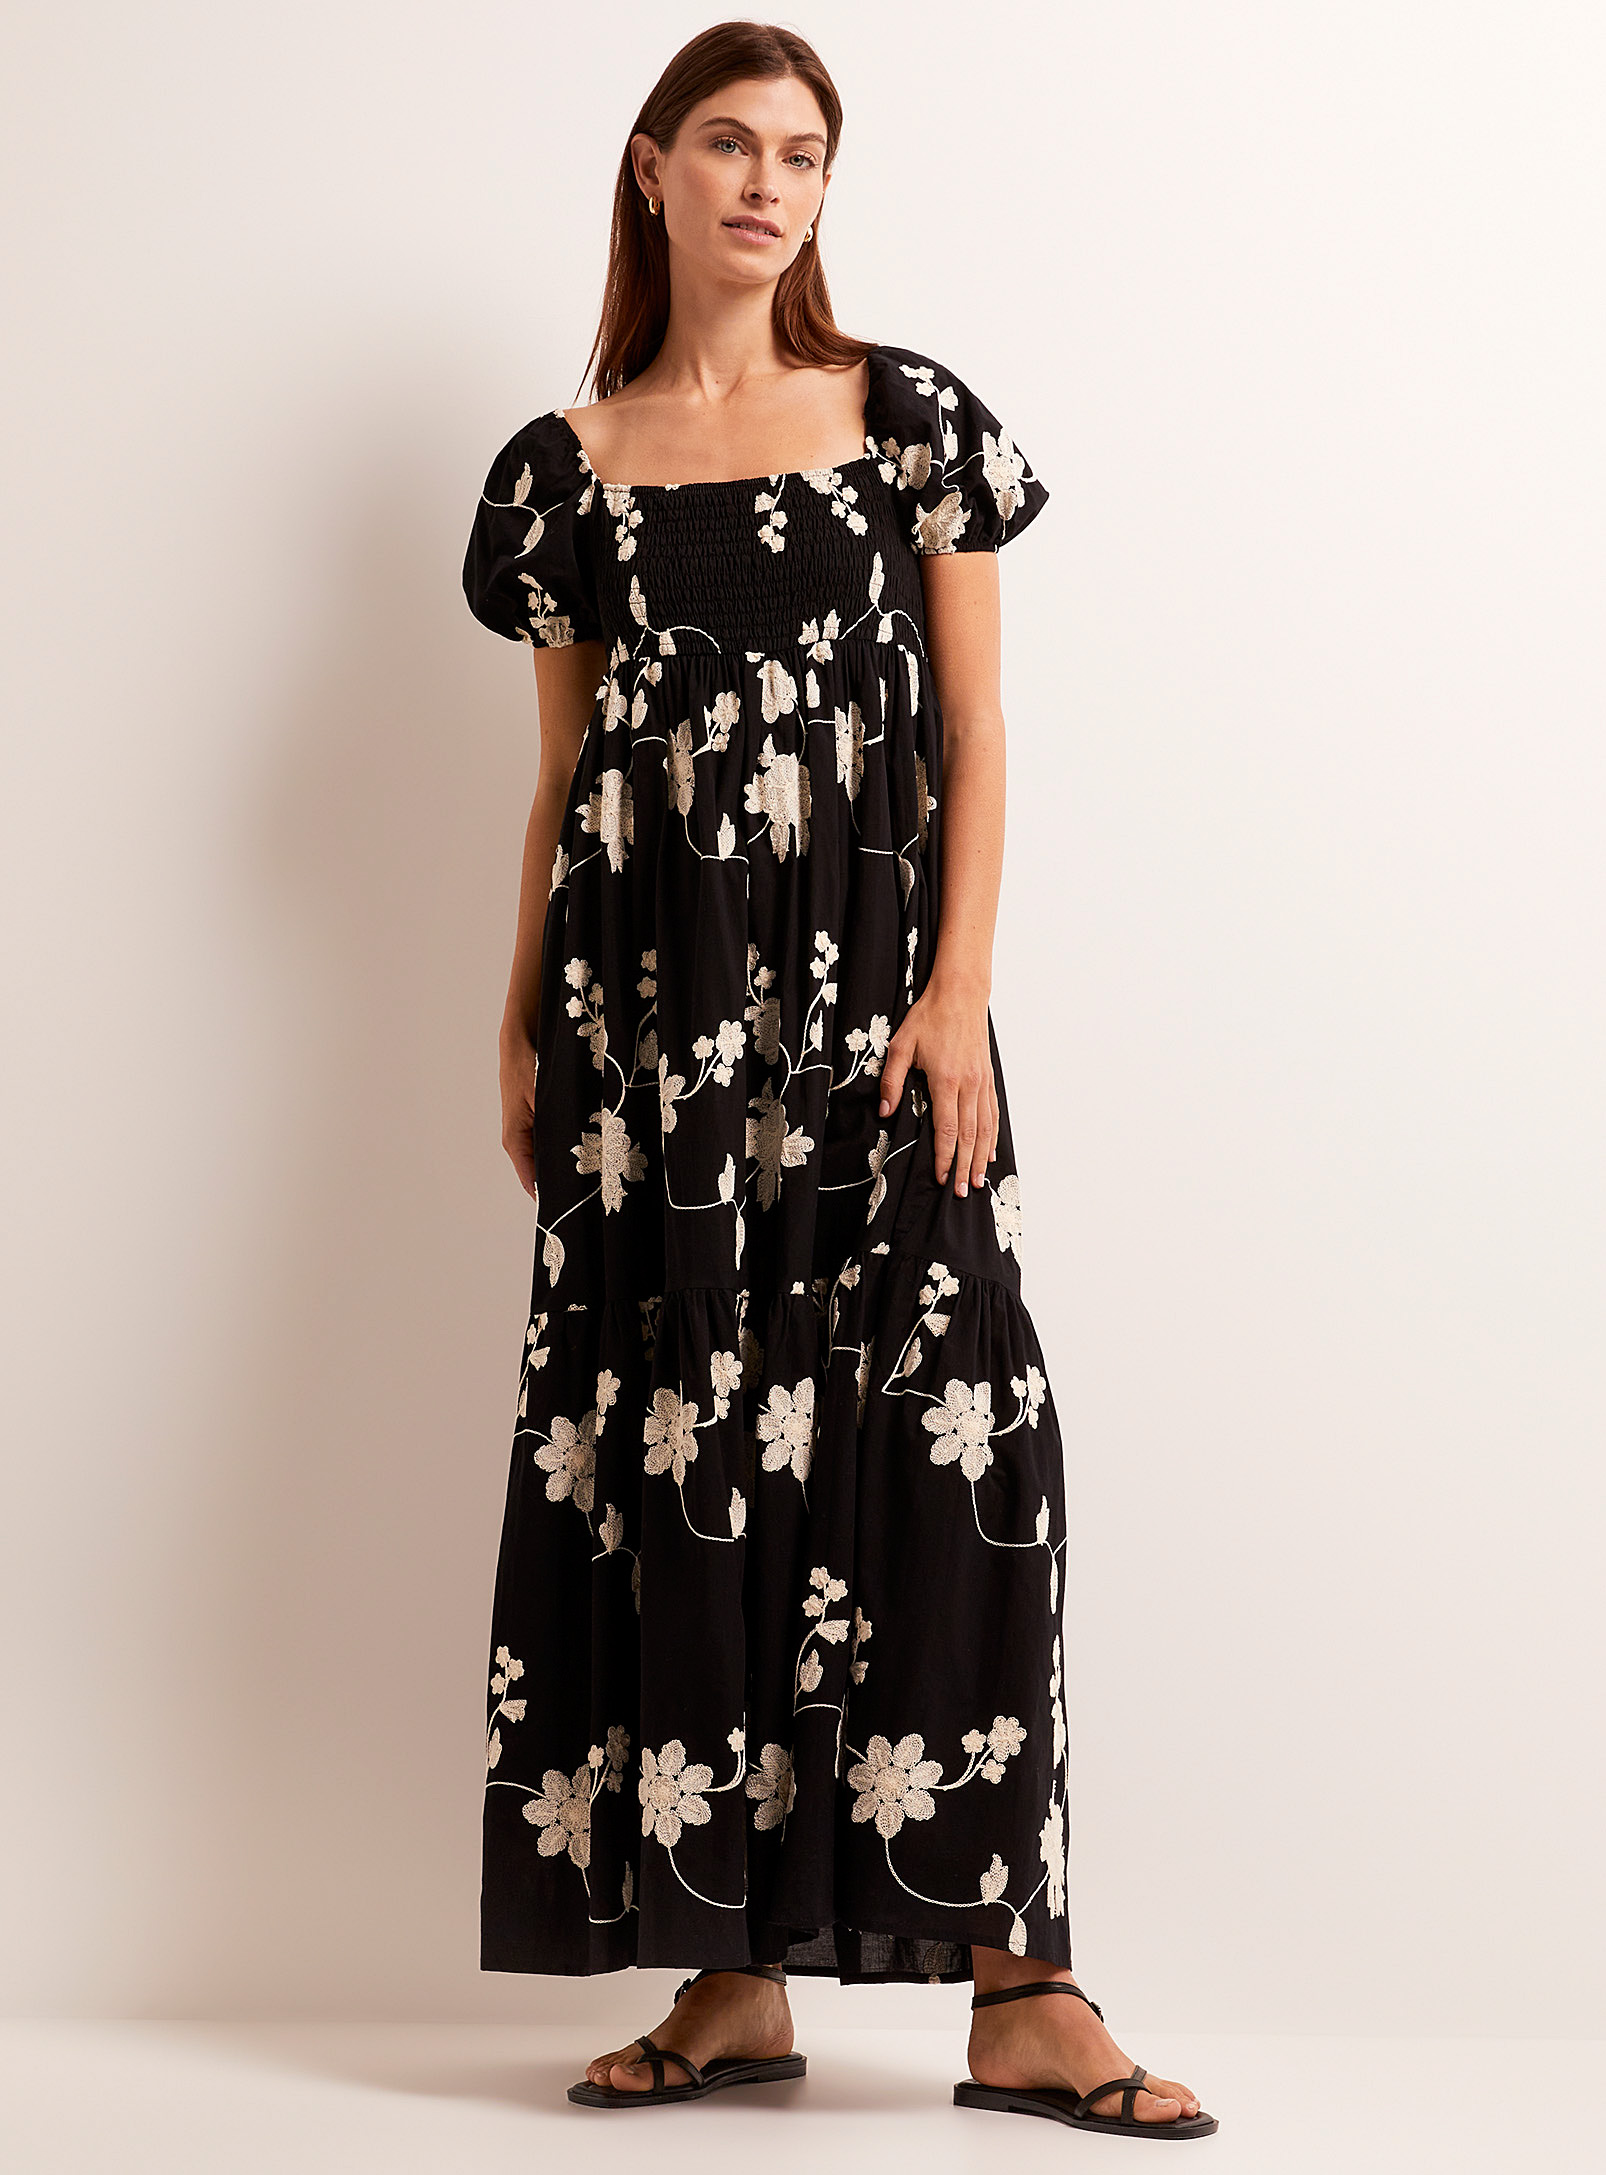 Contemporaine Embroidered Flowers Ruffled Dress In Patterned Black